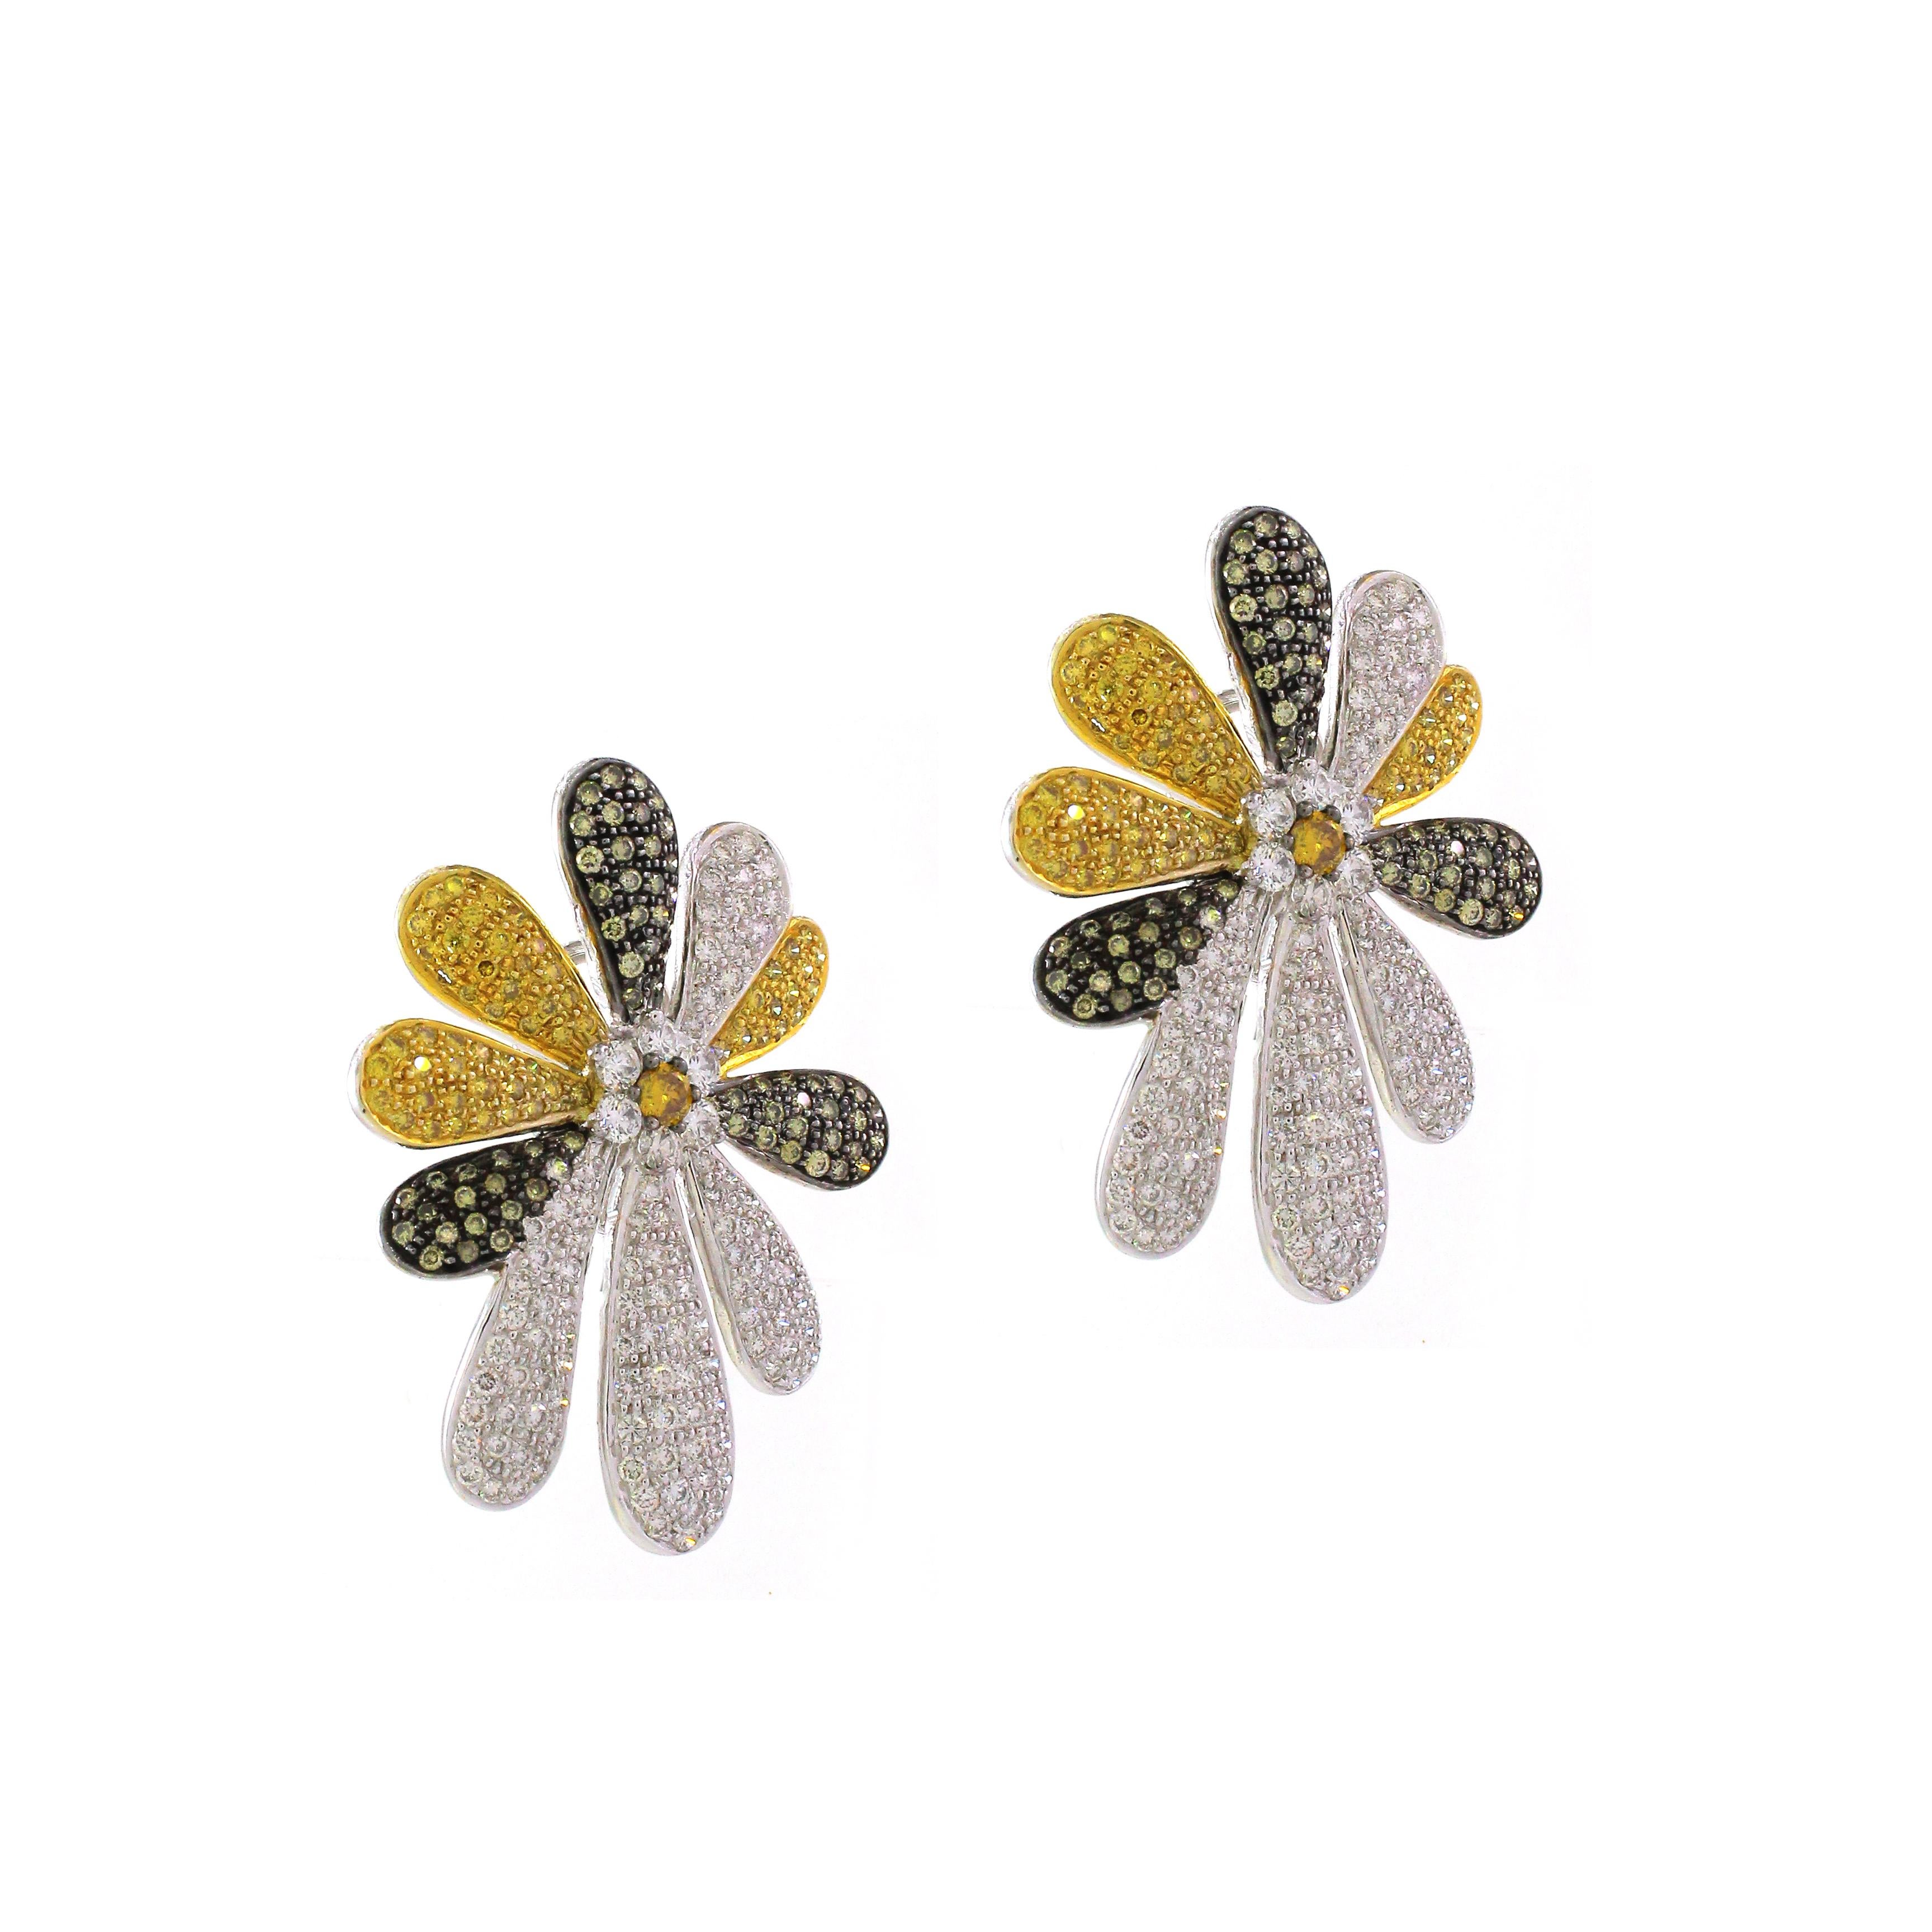 Introducing our stunning Flower-Inspired Stud Earrings, meticulously crafted in luxurious 14K white gold, weighing a total of 22.66 grams. These exquisite earrings are a true celebration of nature's beauty, featuring a mesmerizing array of white and